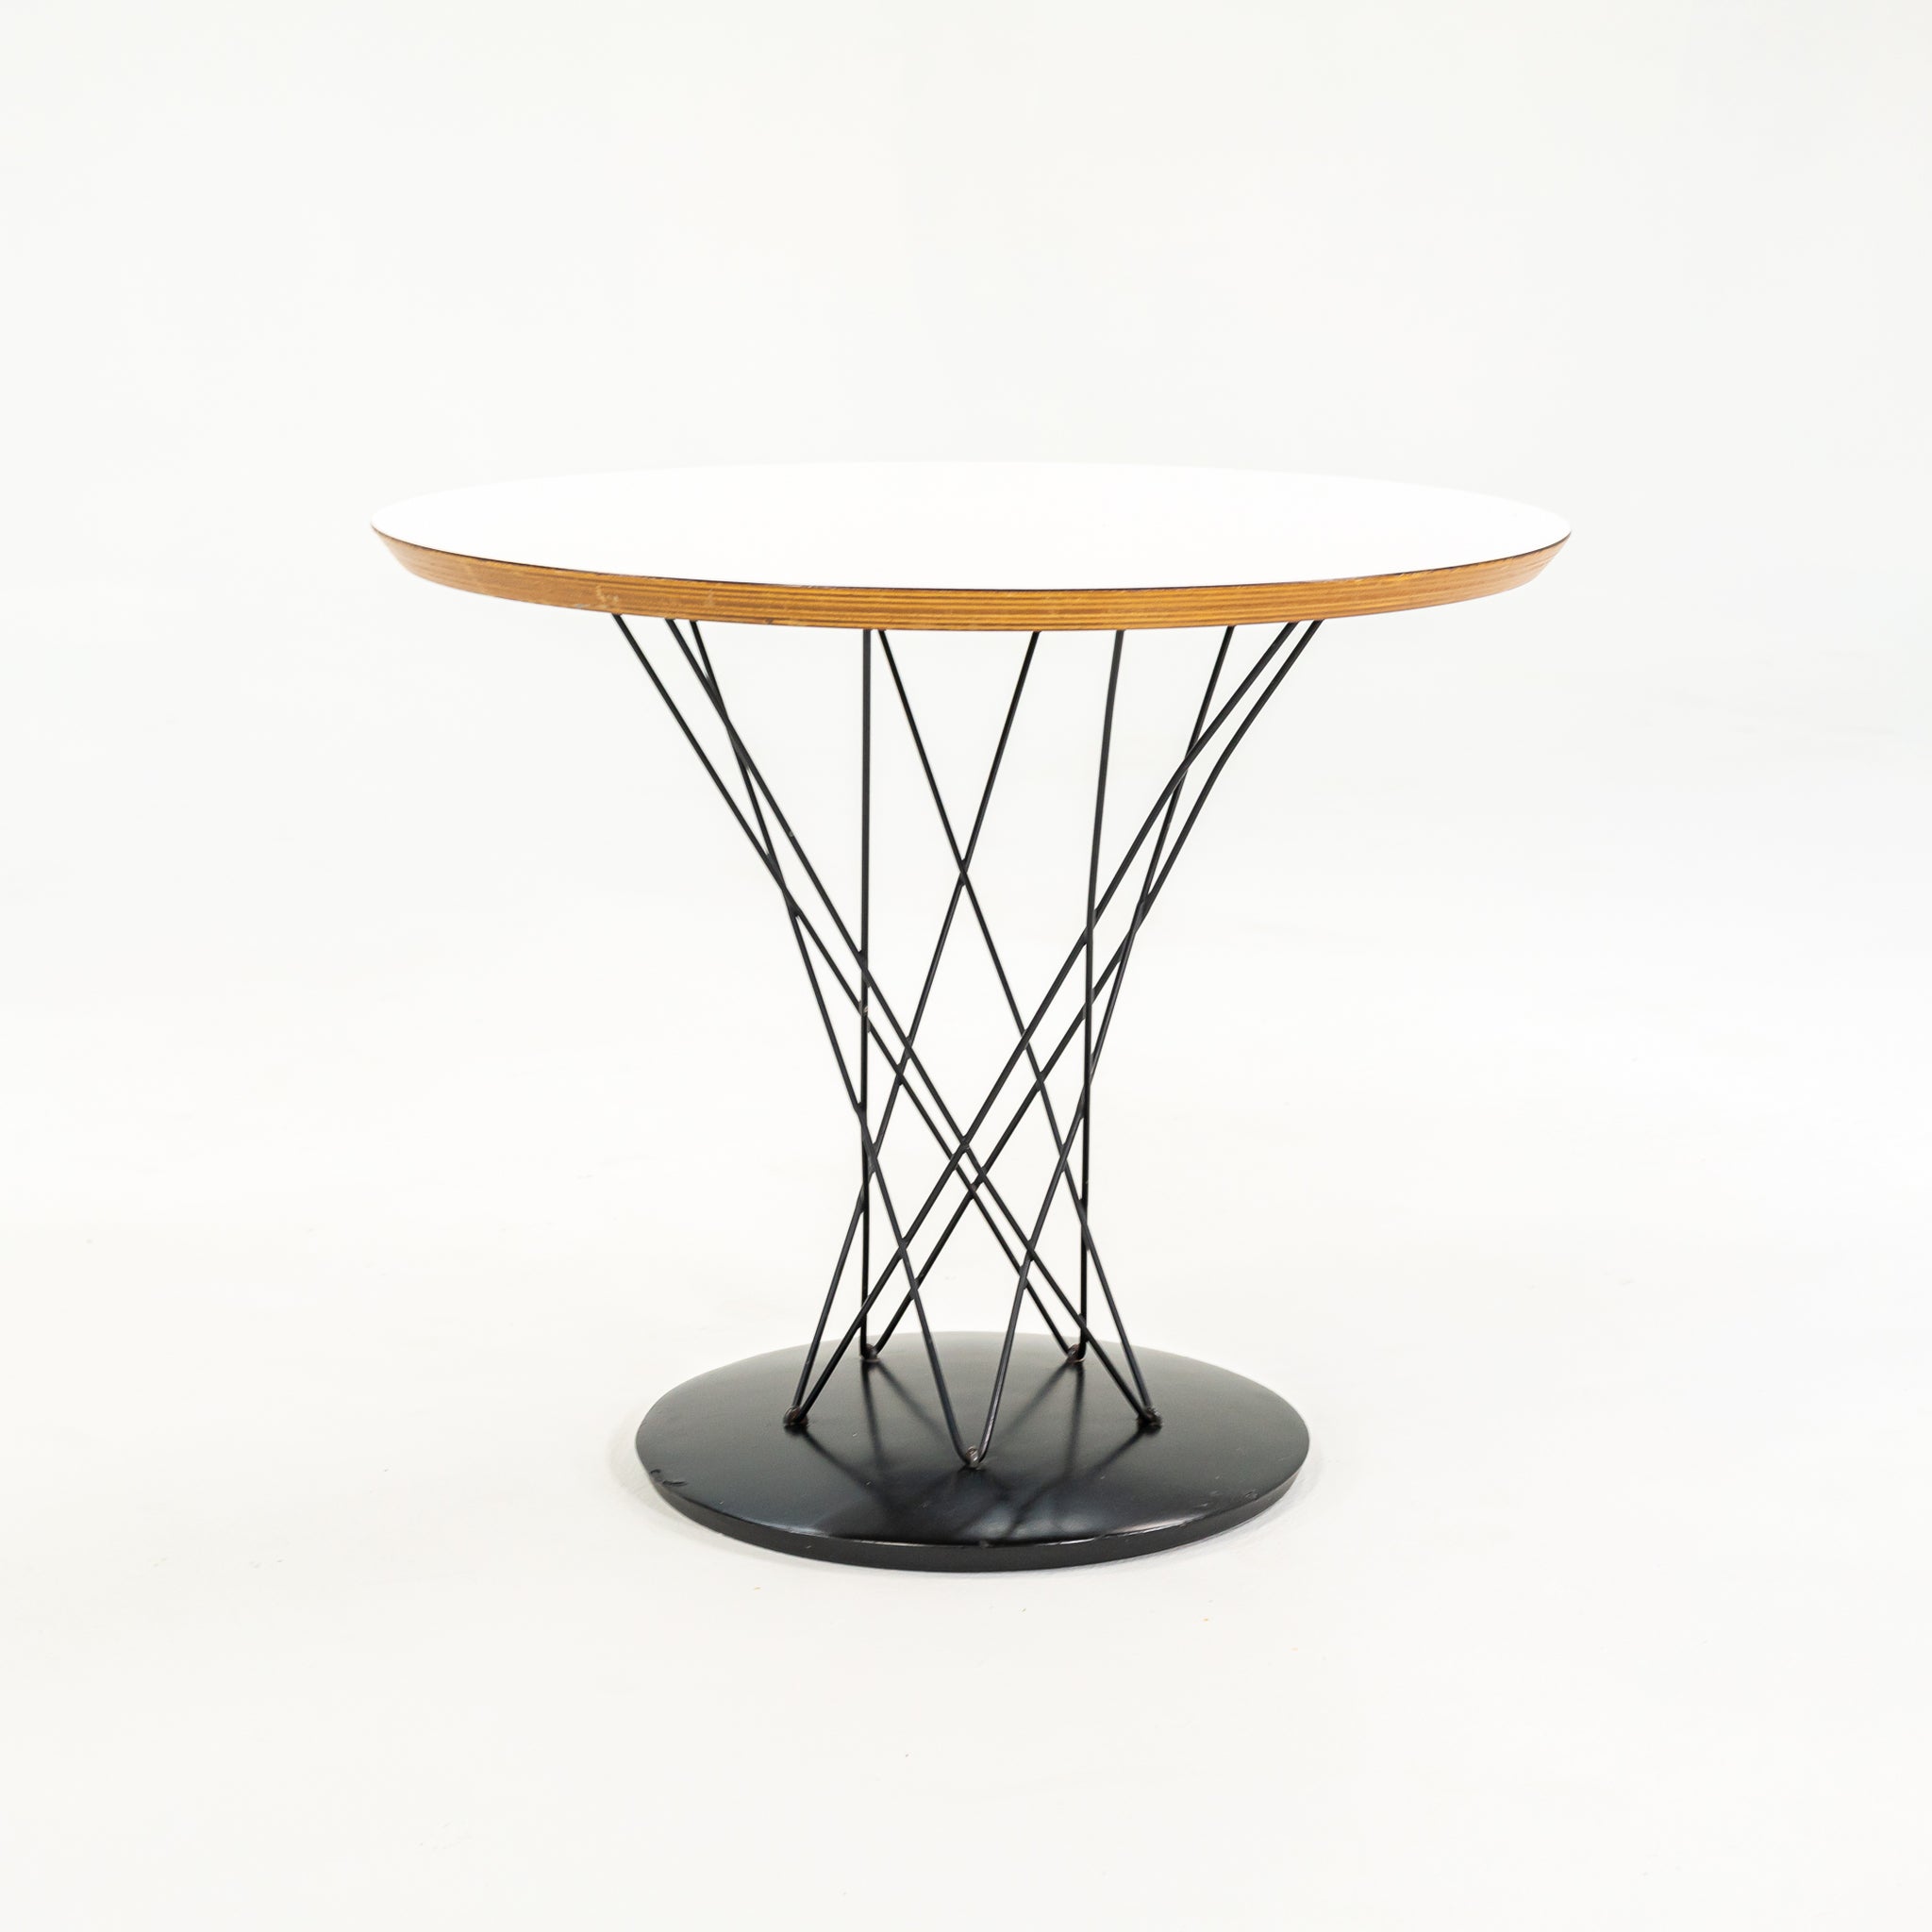 SOLD 1972 Isamu Noguchi for Knoll Associates Cyclone Childs End Table in White Laminate